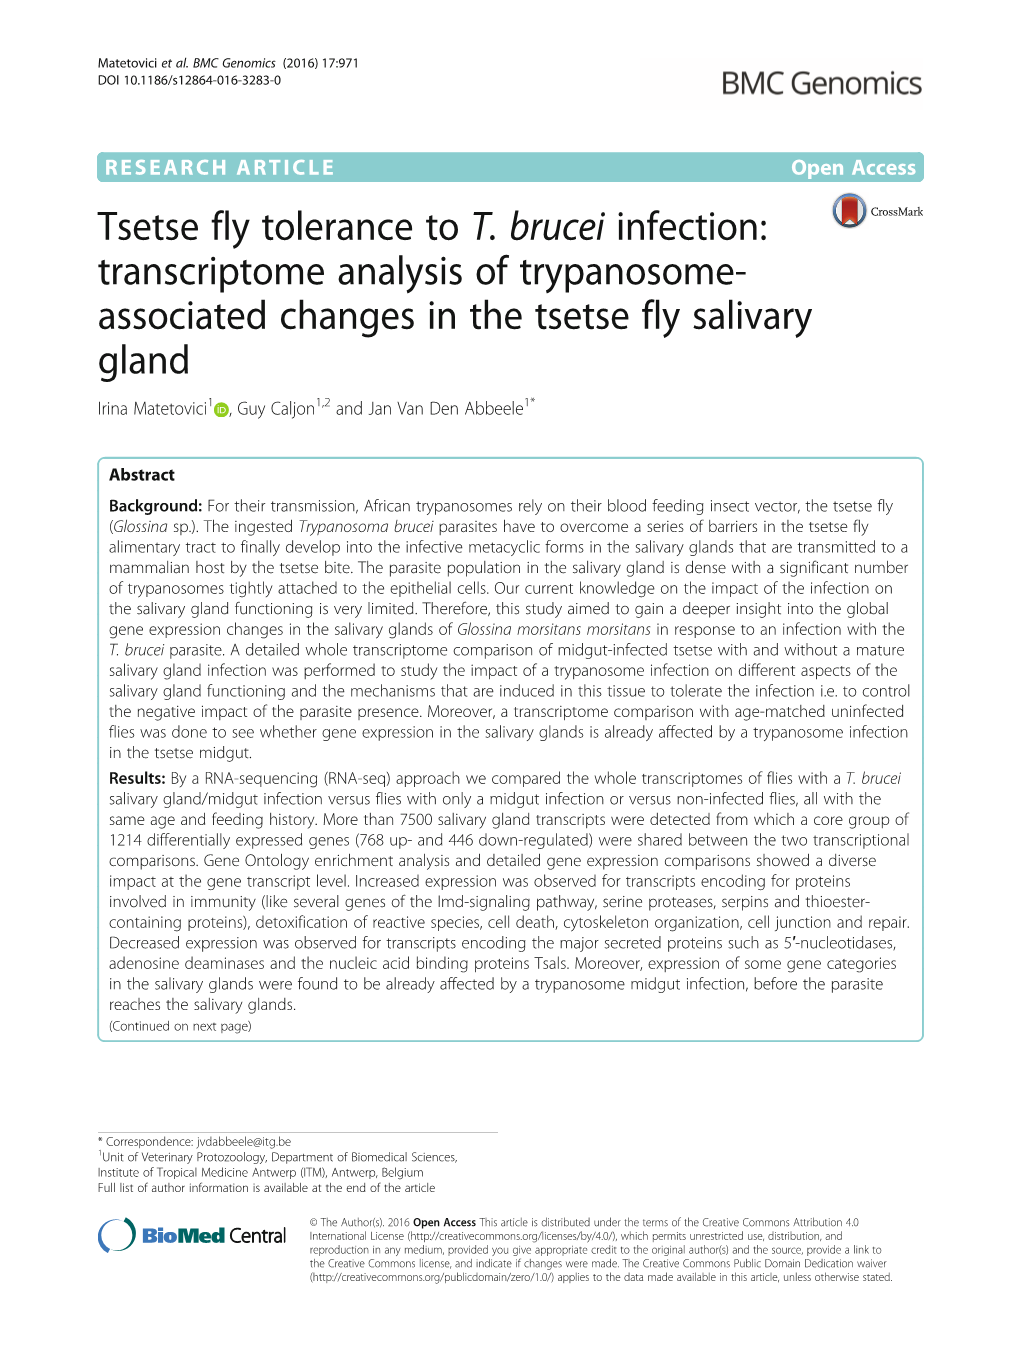 Tsetse Fly Tolerance to T. Brucei Infection: Transcriptome Analysis of Trypanosome-Associated Changes in the Tsetse Fly Salivary